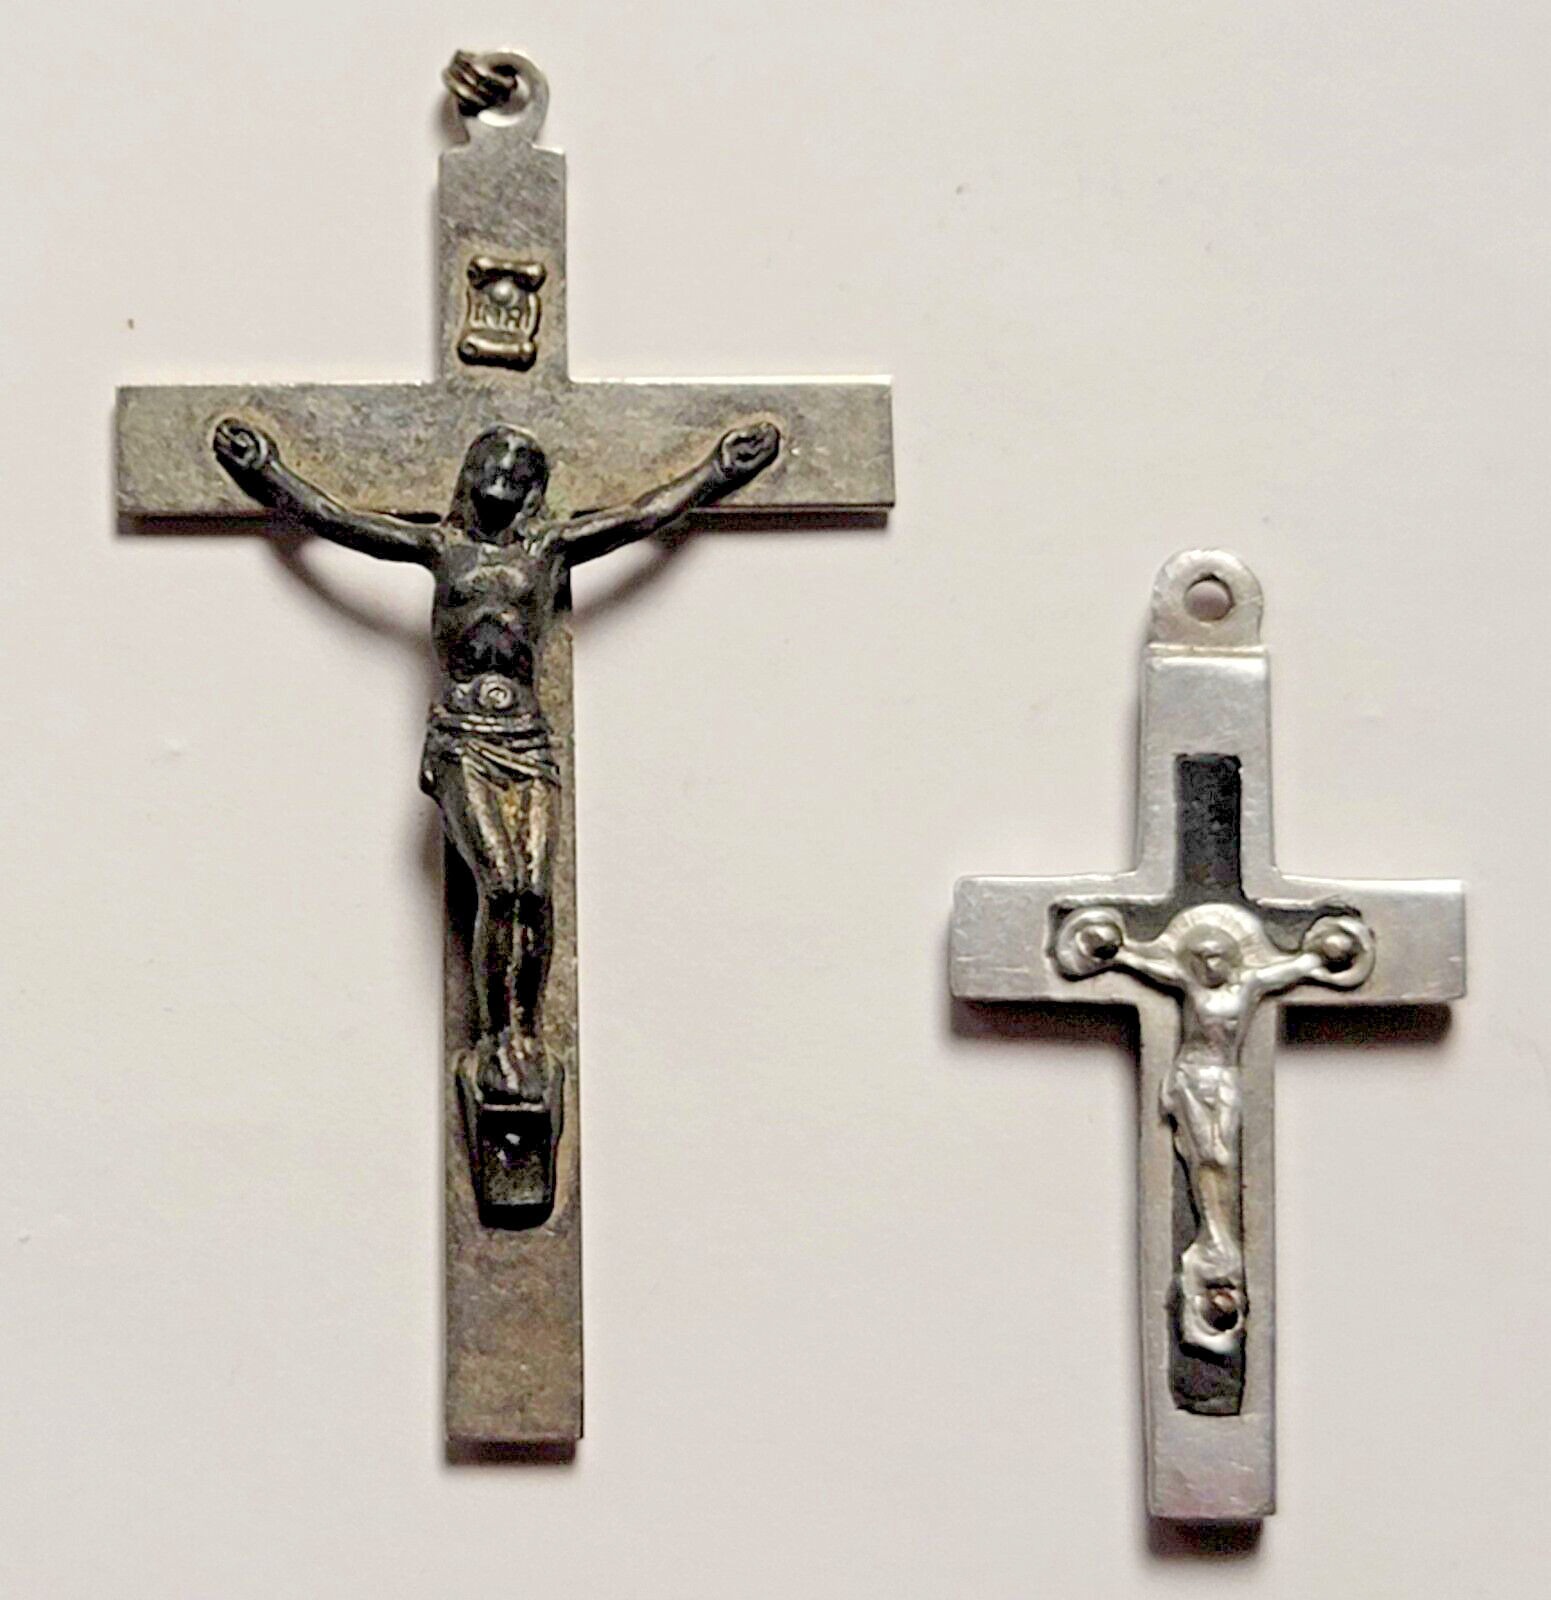 Set 2 vintage crucifixes. Measure app.57 x 32mm and 38 x 20mm respectively…Italy